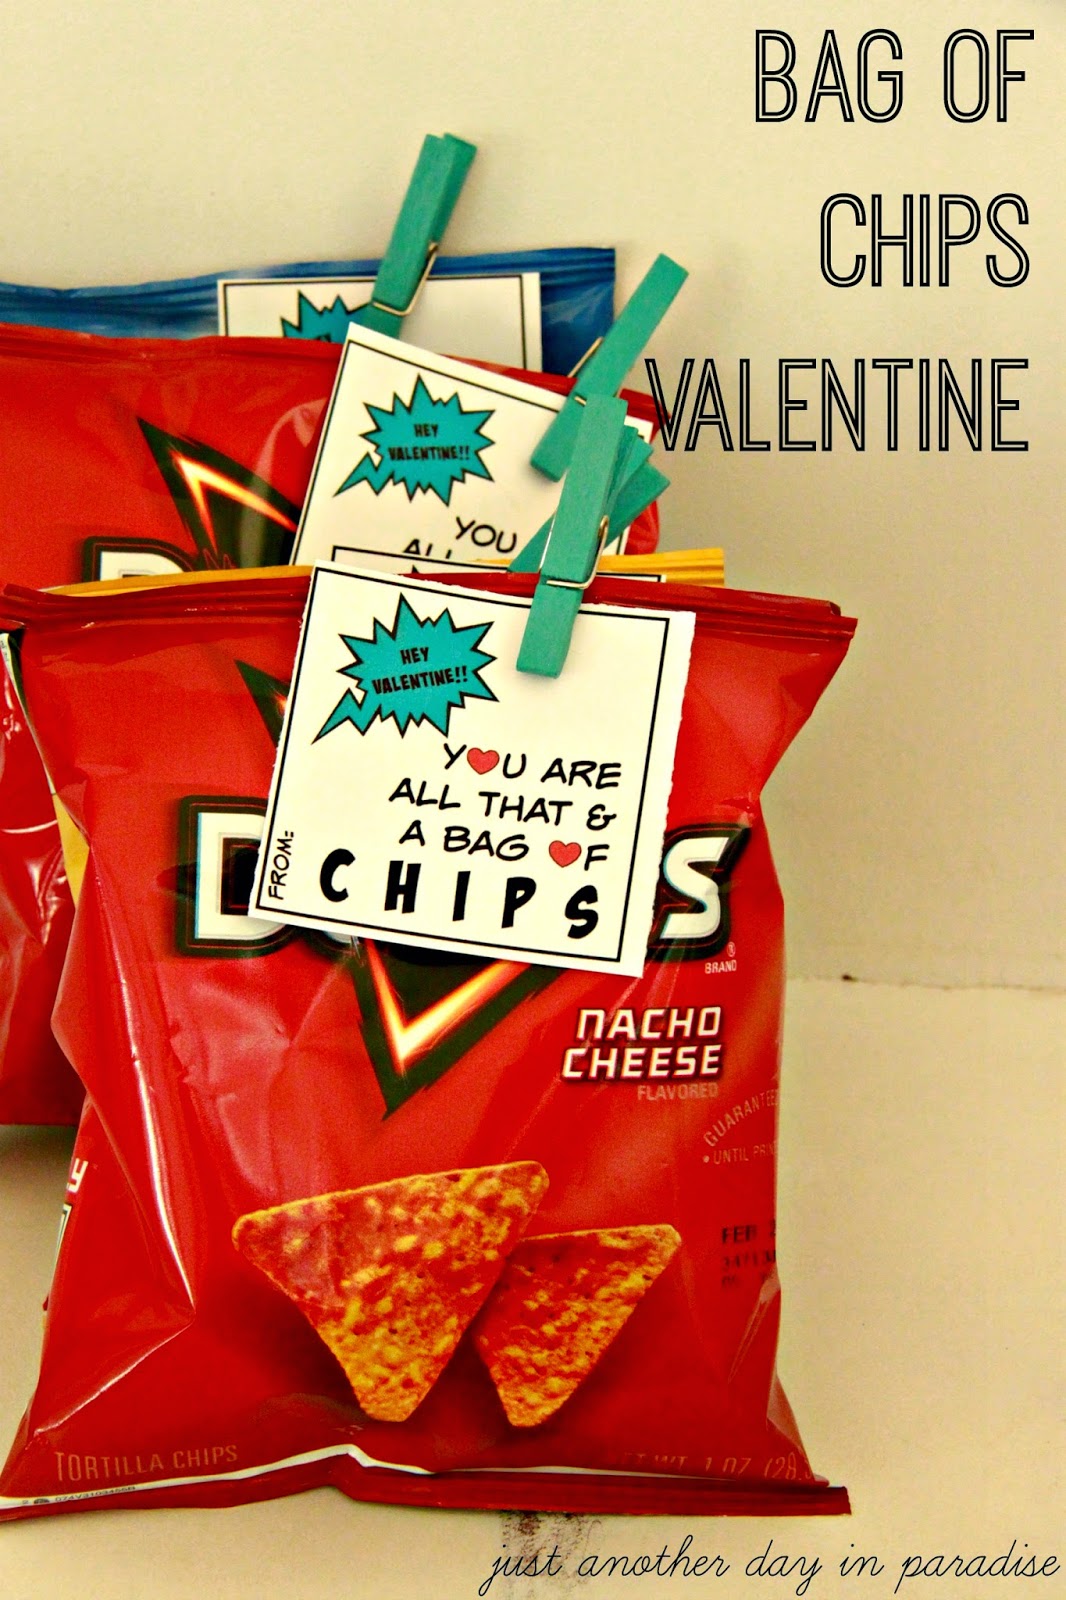 larissa-another-day-all-that-and-a-bag-of-chips-classroom-valentines